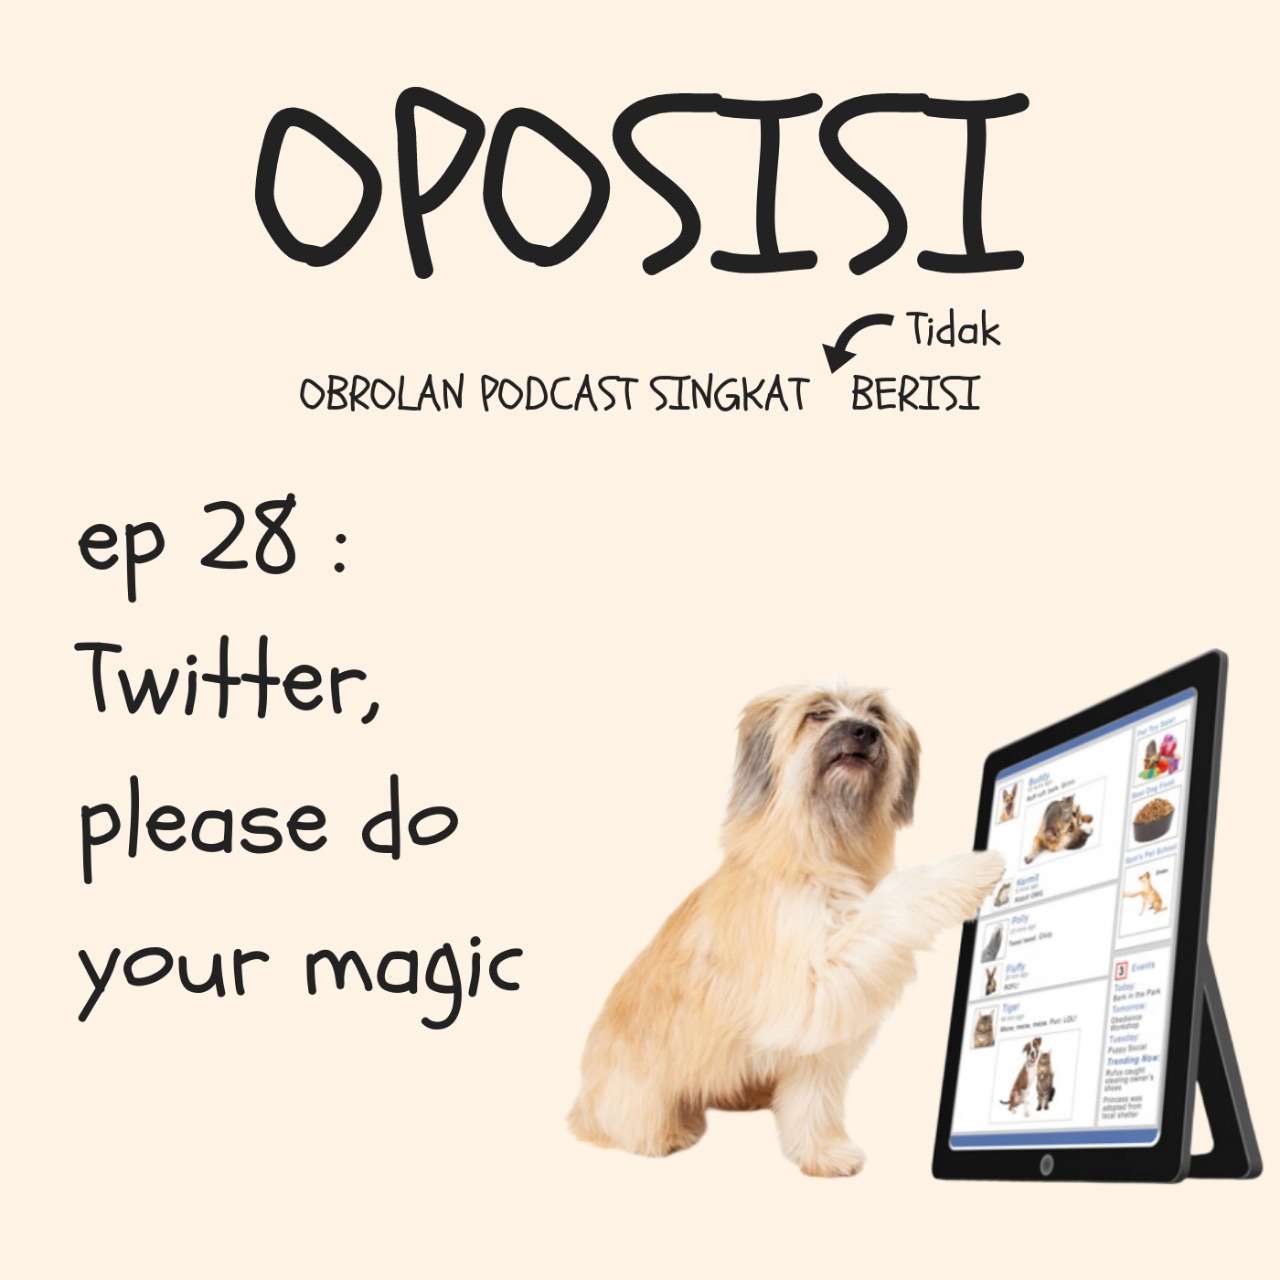 OPOSISI - EPS 28 - TWITTER, PLEASE DO YOUR MAGIC